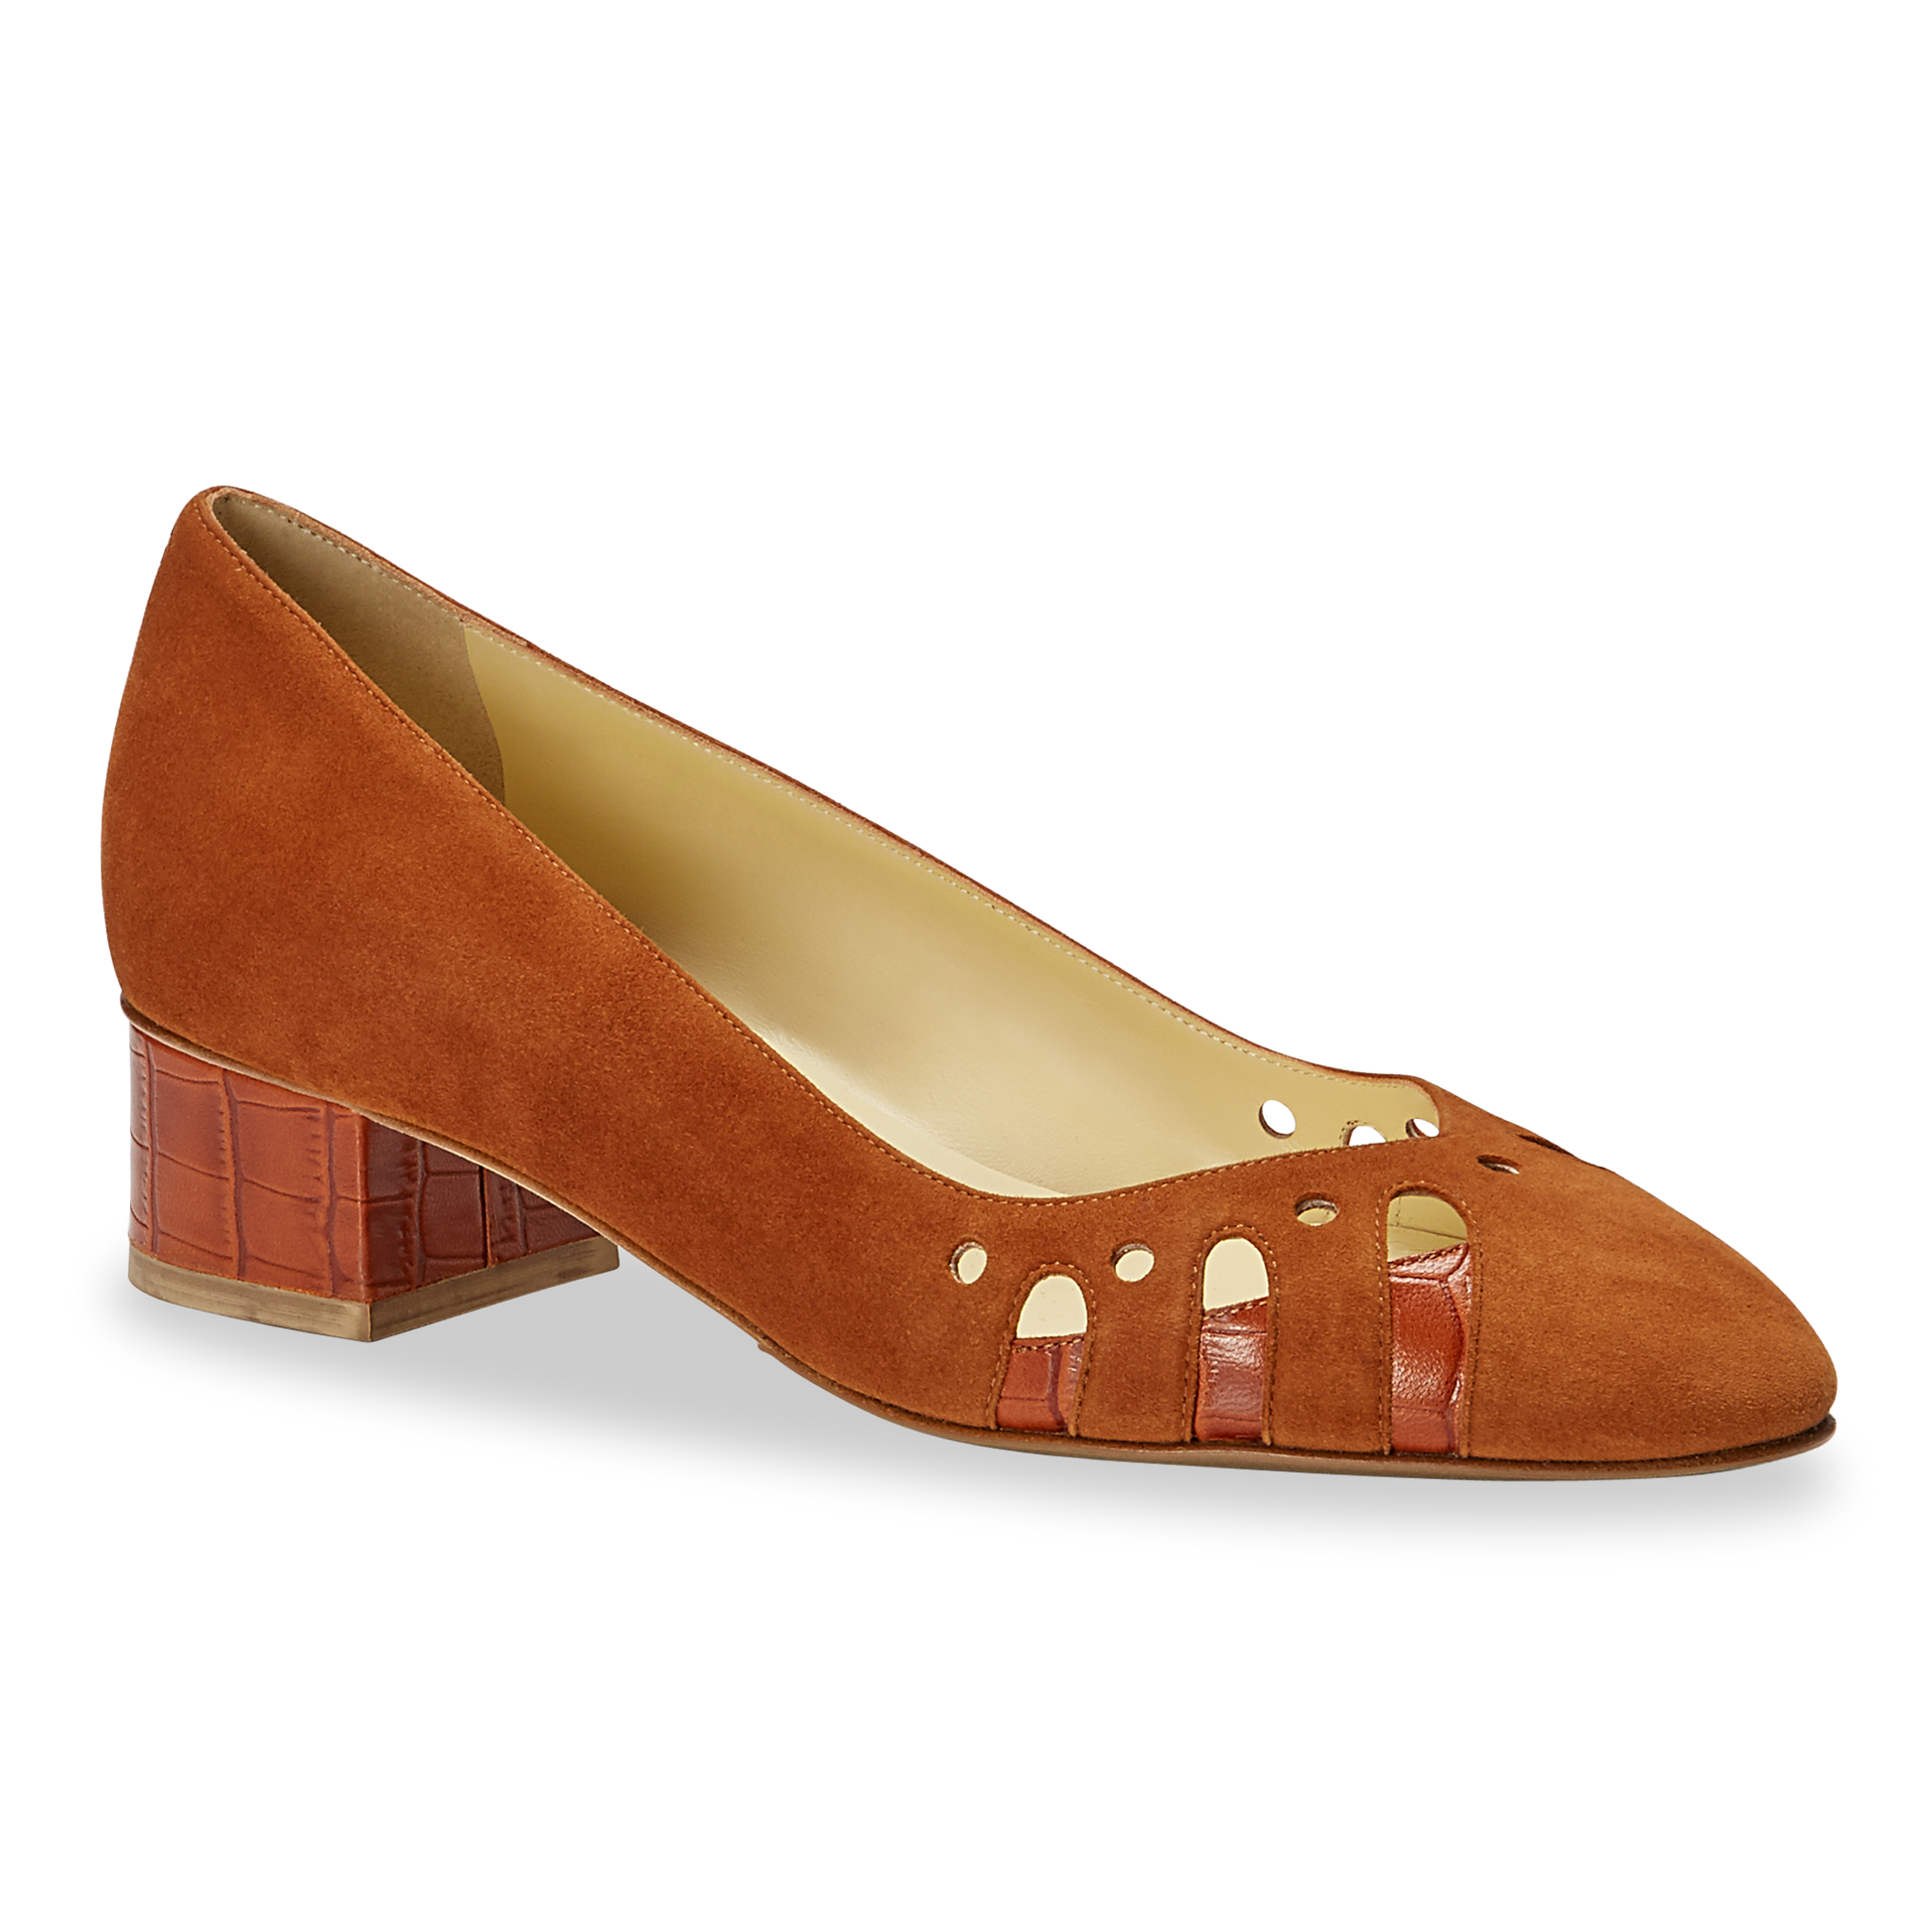 30mm Italian Made Shellie Round Toe Pump in Cognac Suede